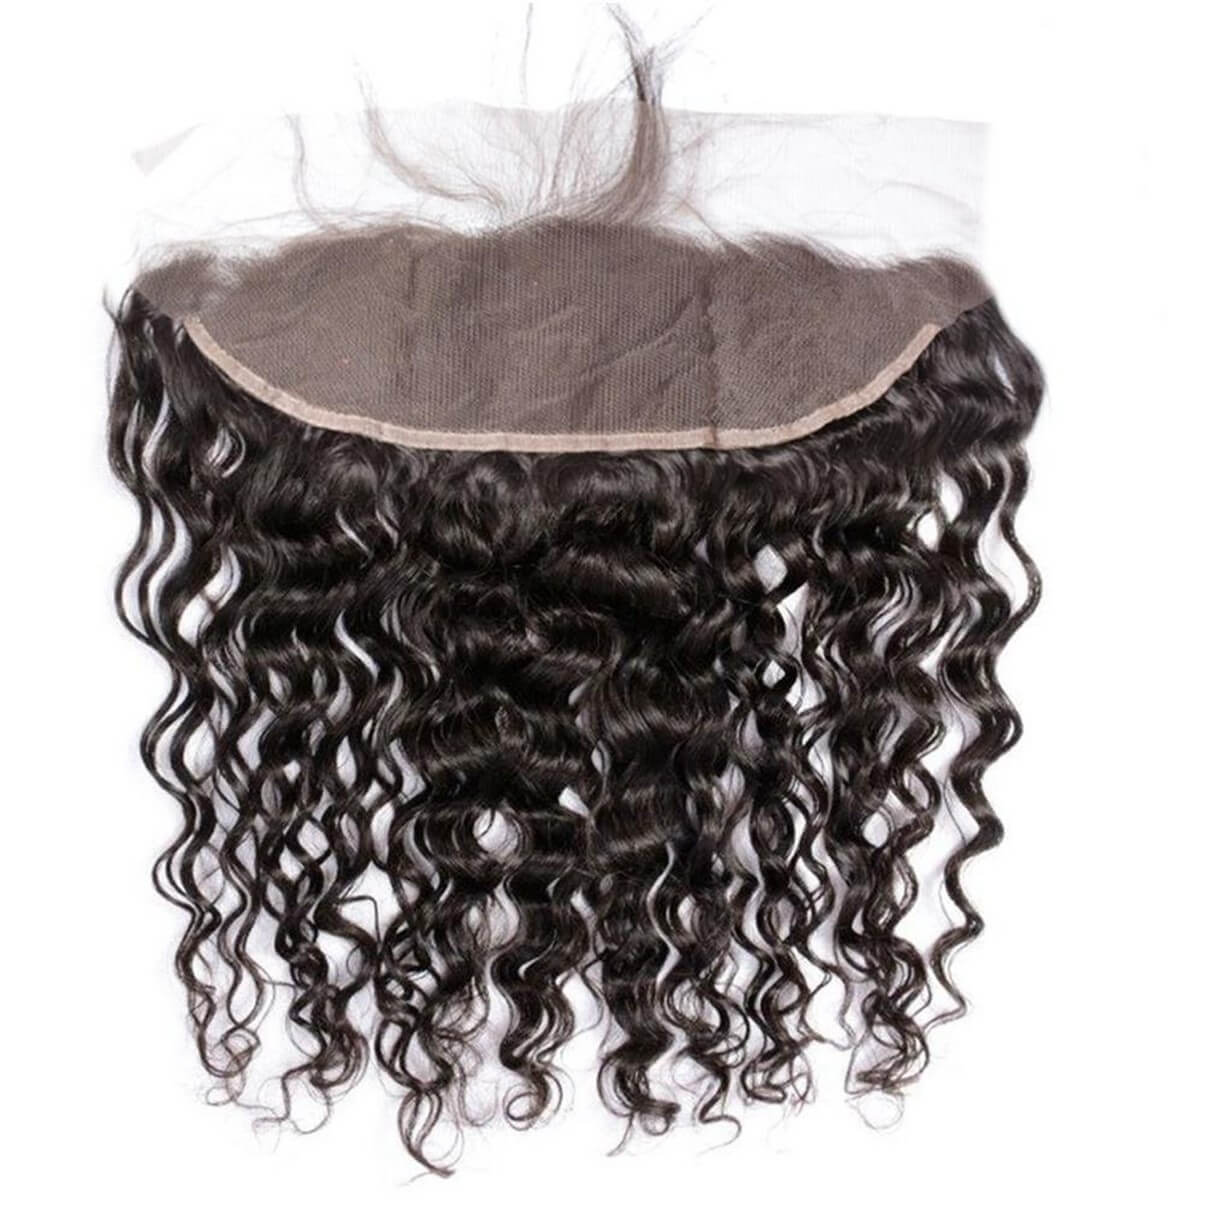 Lakihair 8A Brazilian Human Hair Extensions 4 Bundles With Lace Frontal Closure 13x4 Ear To Ear